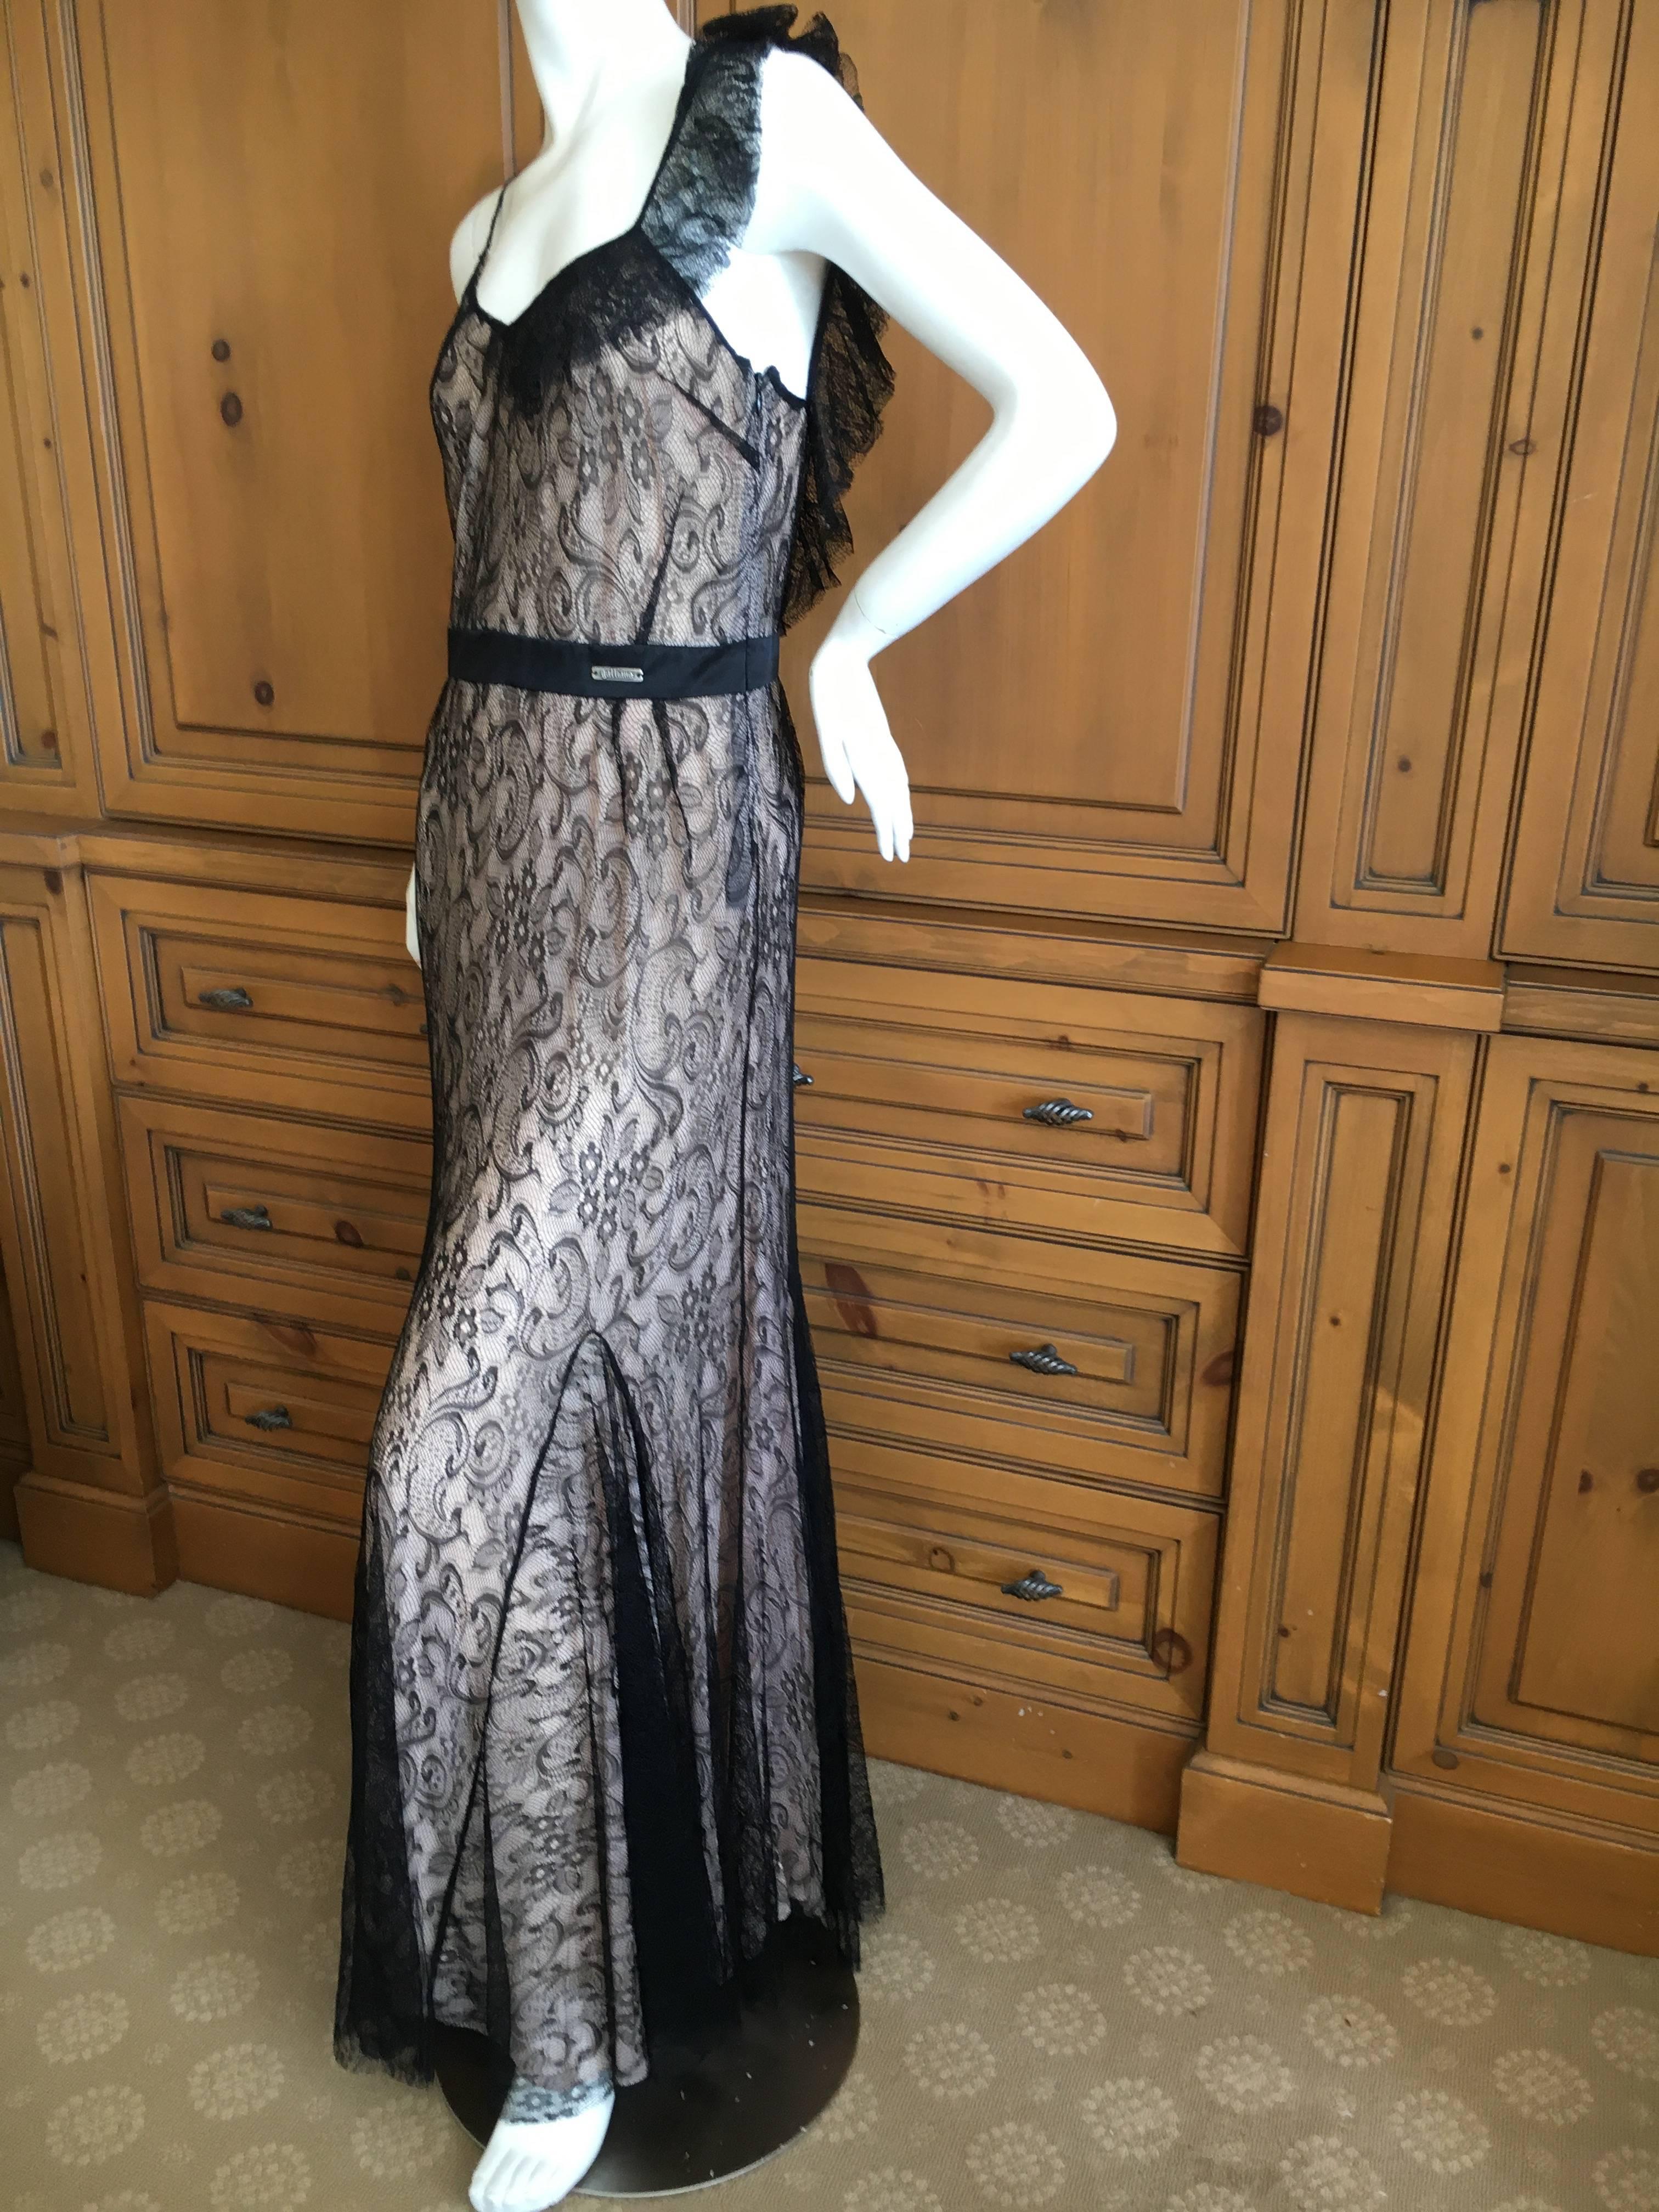 Elegant John Galliano Black Lace Evening Dress with Pale Pink Under Lining.
Size 42
Bust 38"
Waist 28"
Hips 42"
Length 60"
Excellent condition